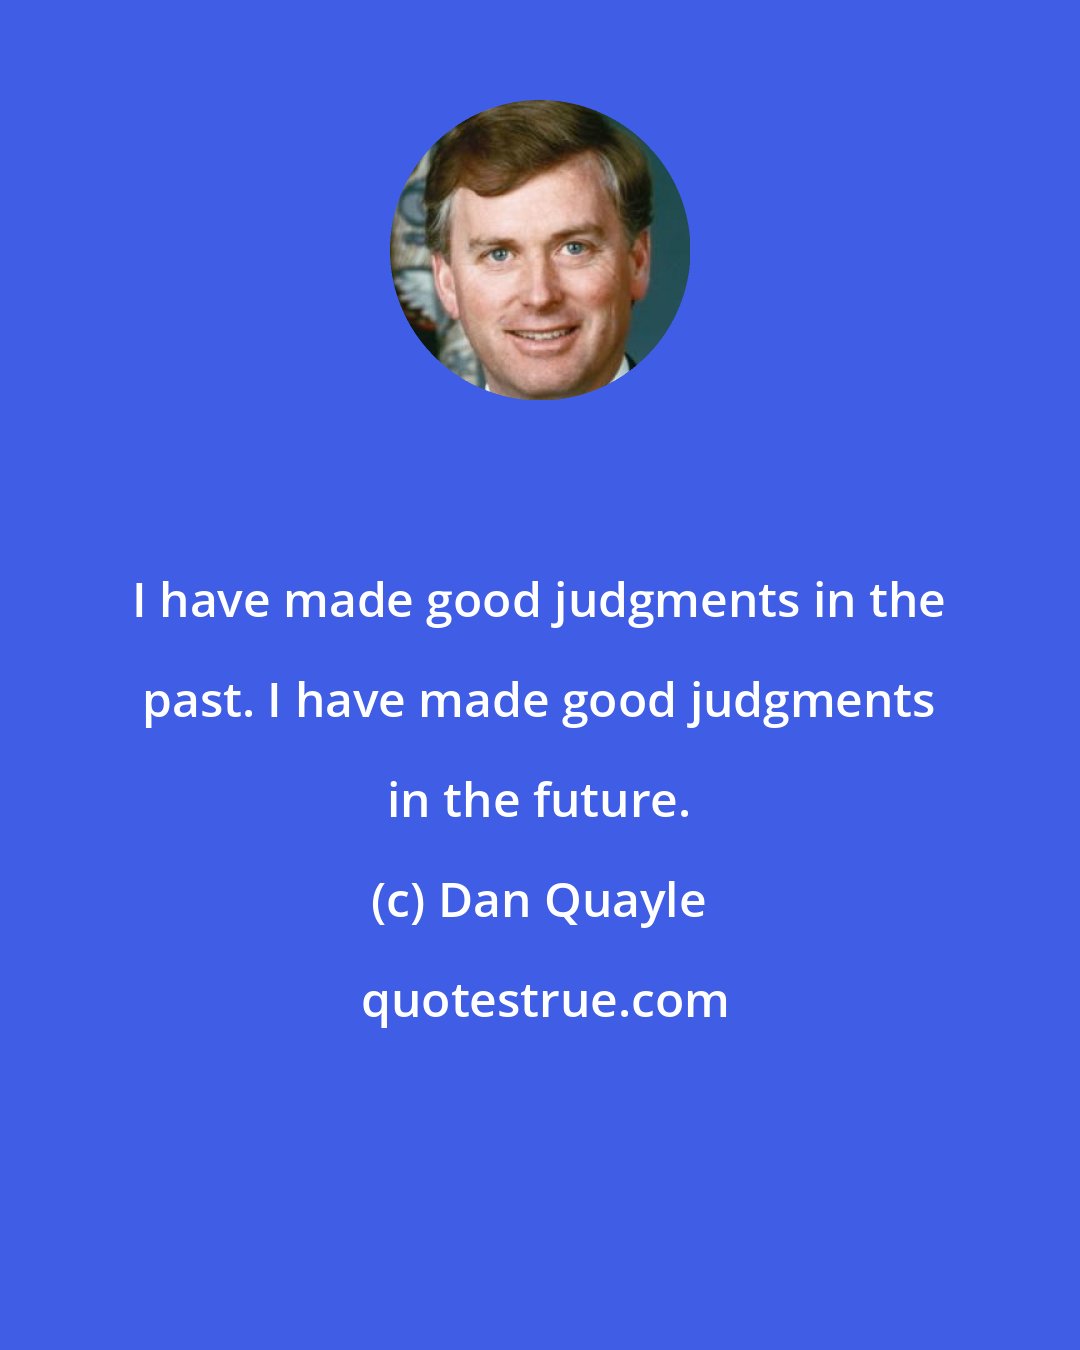 Dan Quayle: I have made good judgments in the past. I have made good judgments in the future.